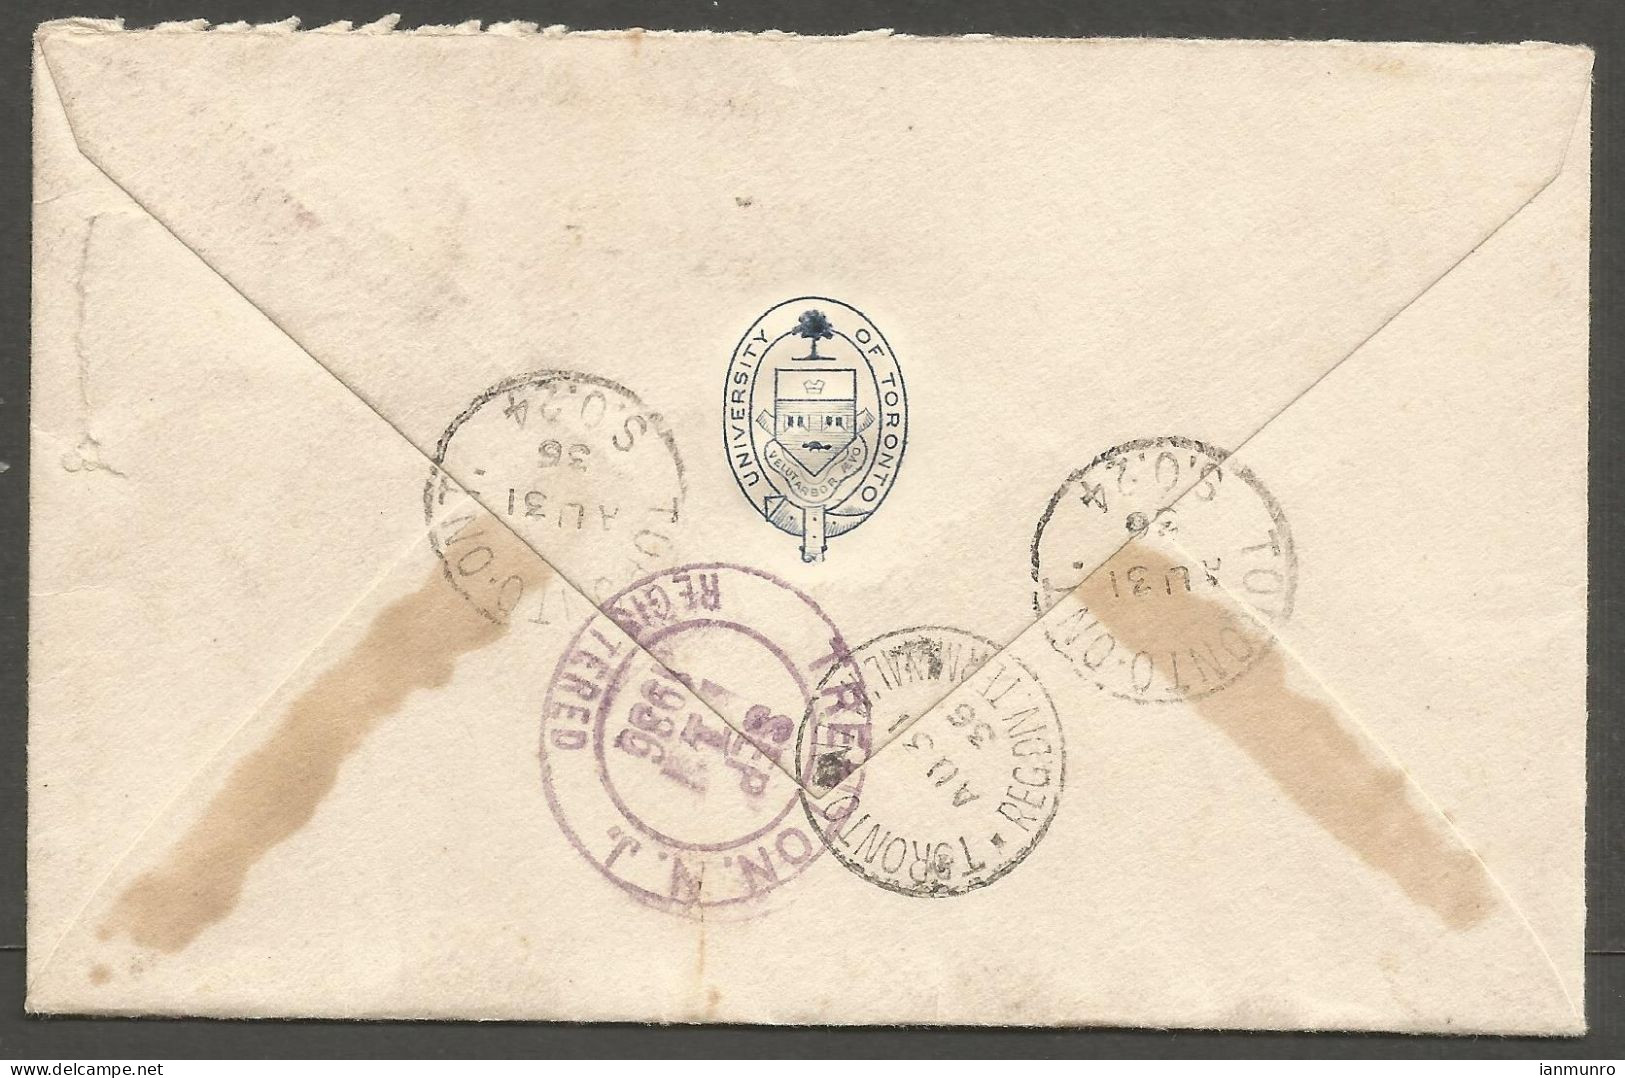 1936 University Of Toronto Registered Airmail Cover 16c Cartier/Pictorials CDS - Postal History